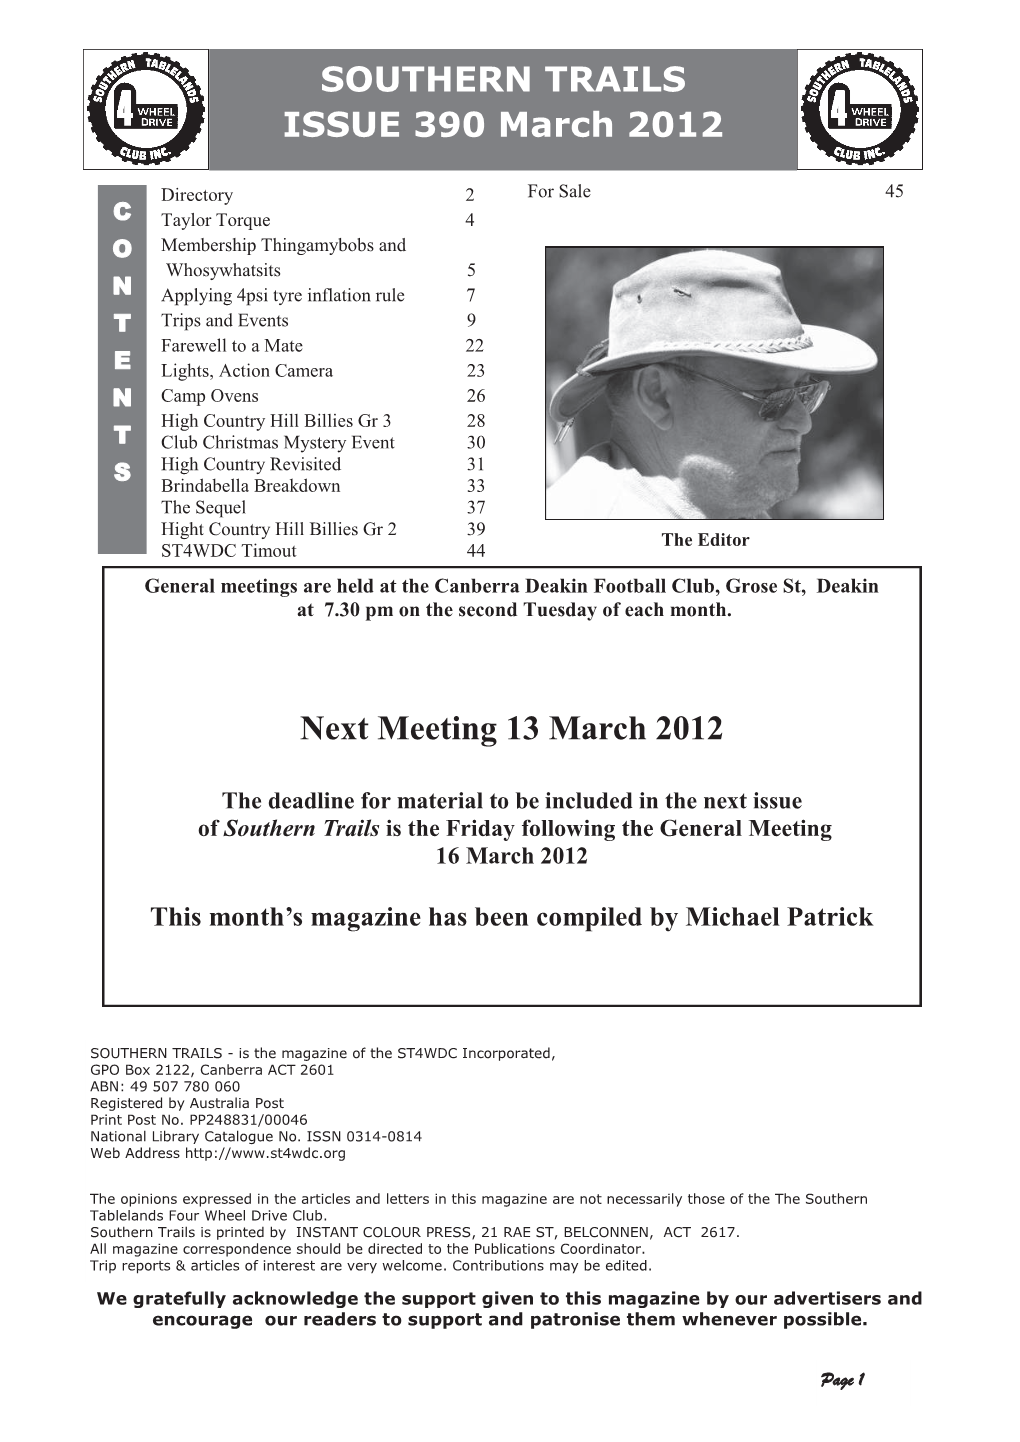 SOUTHERN TRAILS ISSUE 390 March 2012 Next Meeting 13 March